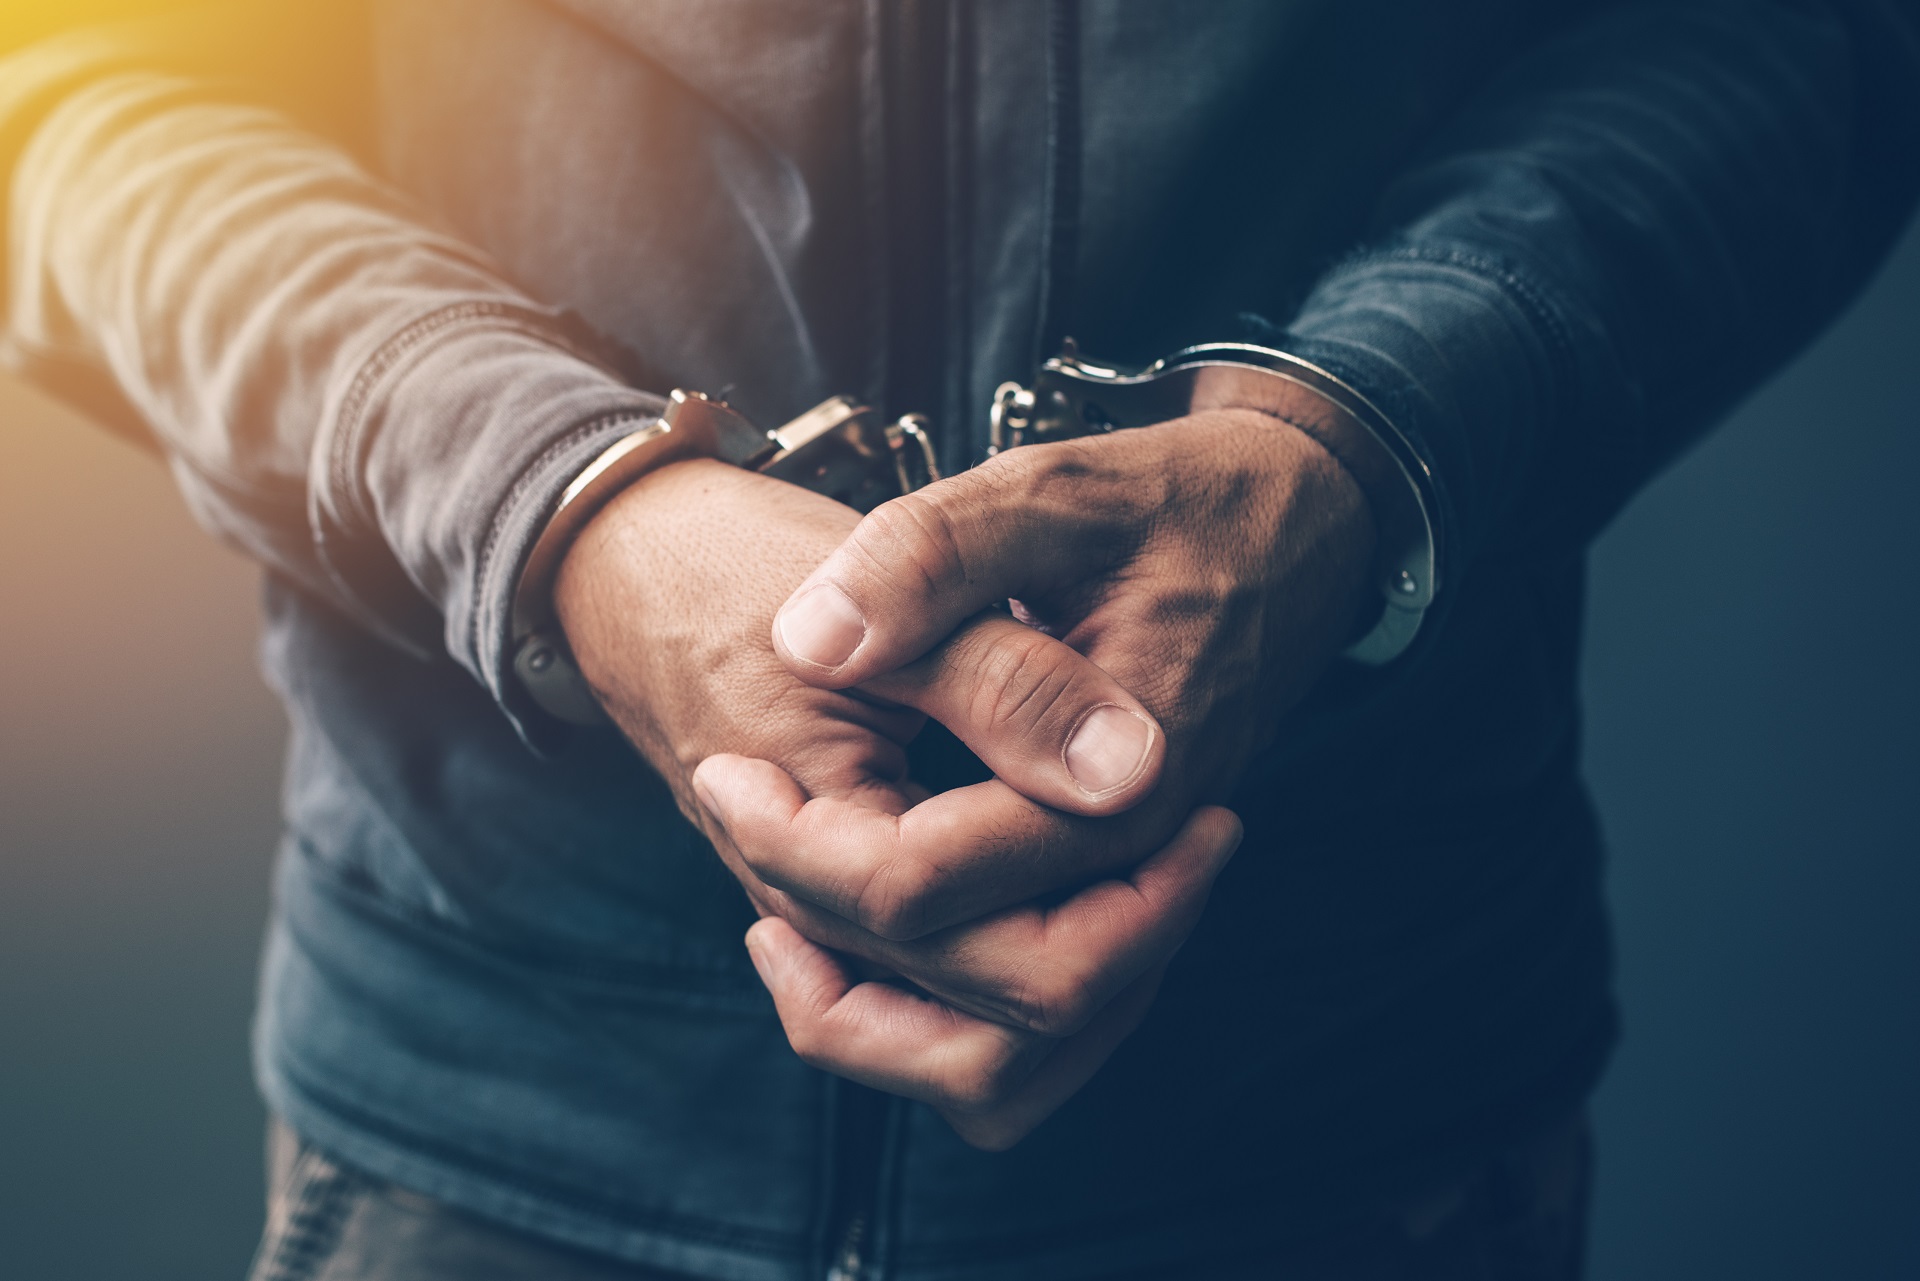 Man Arrested With Handcuffs | Criminal Attorney in Los Angeles California | Wegman & Levin